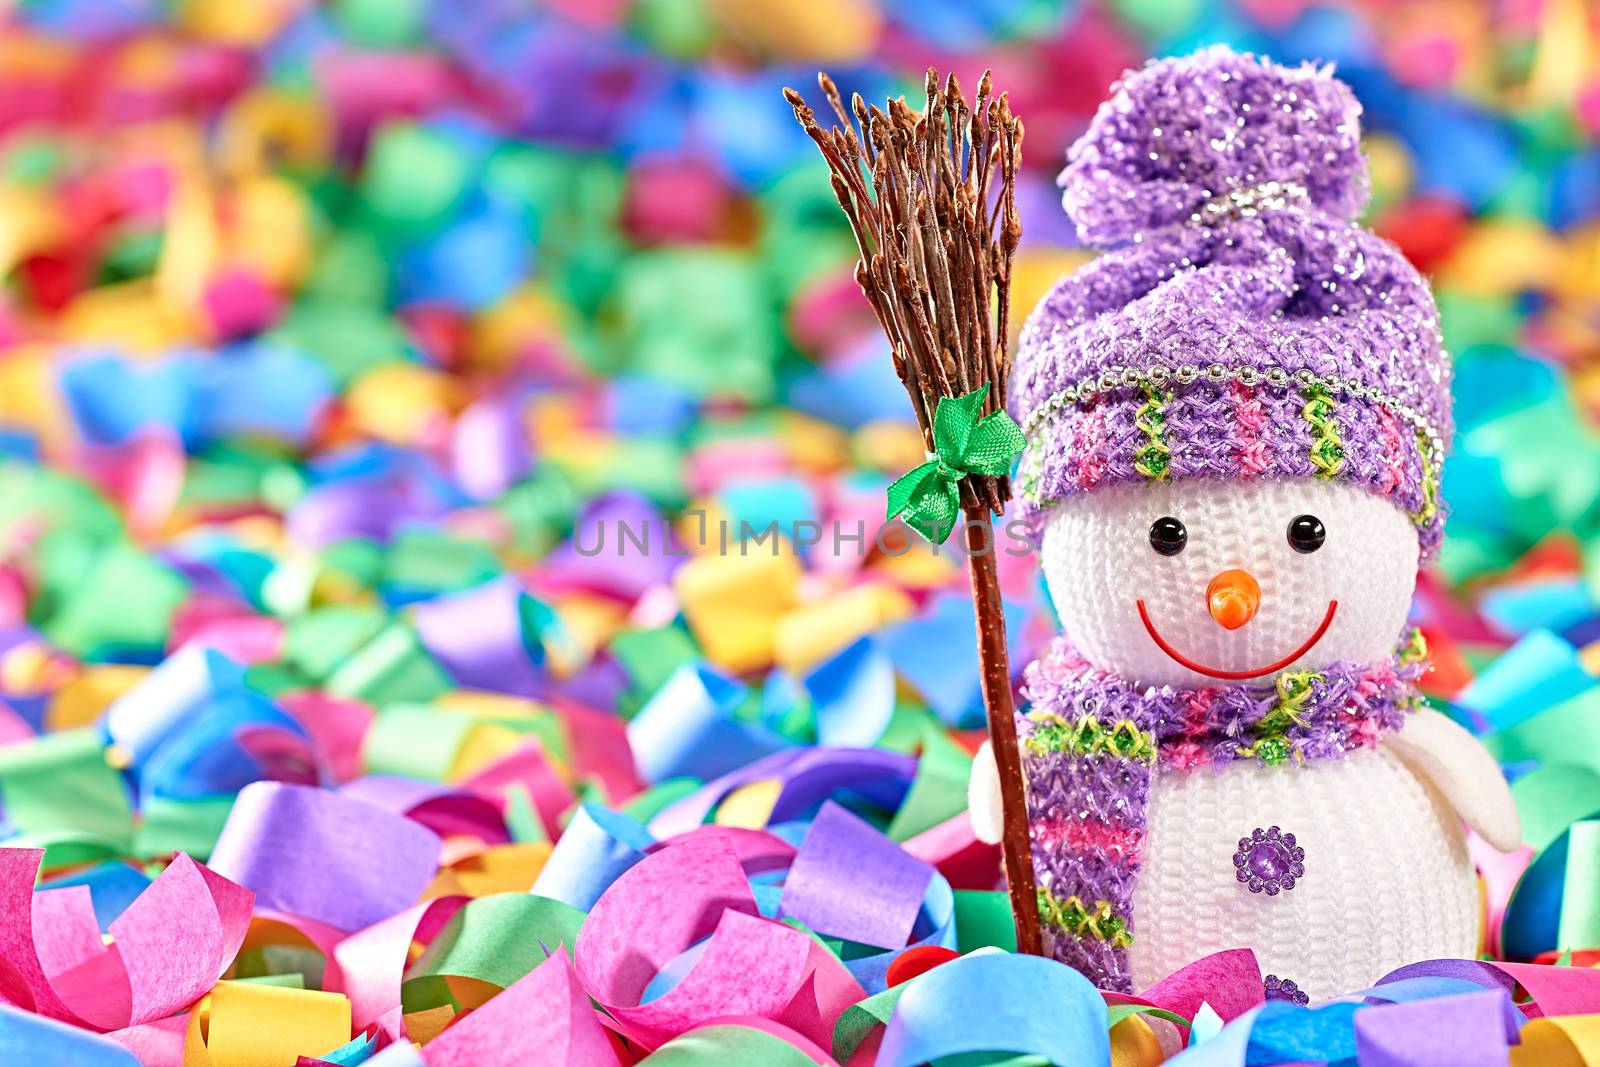 New Year 2016. Happy Snowman. Party decoration multicolored serpentine confetti. Cheerful fun winter holiday, copyspace.Snowman celebration in festive hat, scarf smiling with broom, festive background